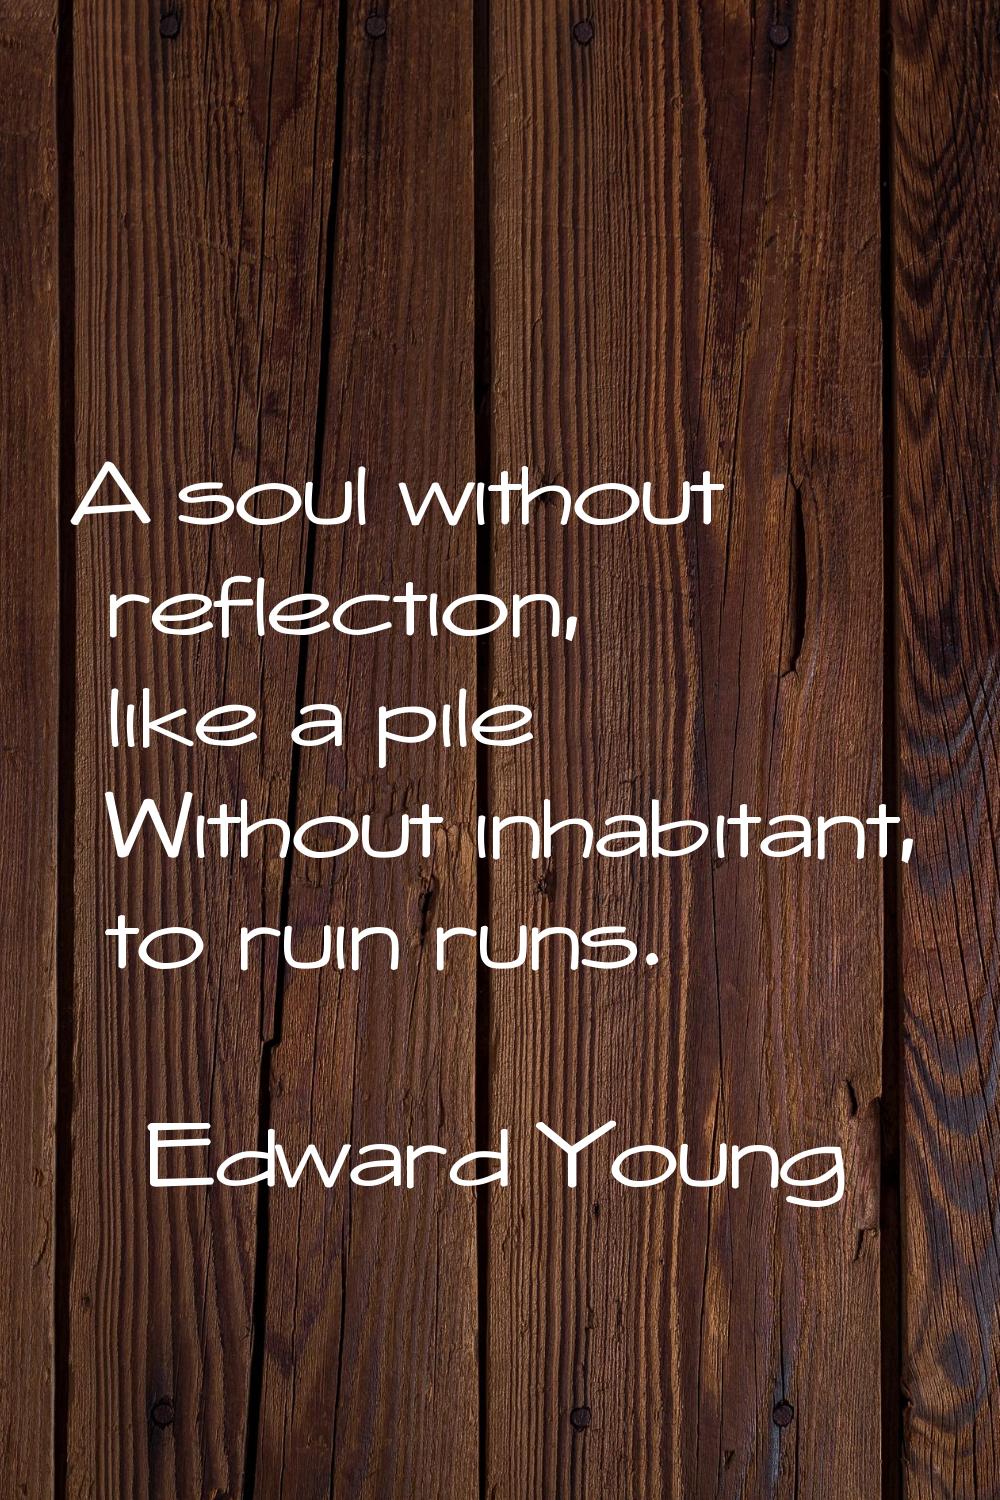 A soul without reflection, like a pile Without inhabitant, to ruin runs.